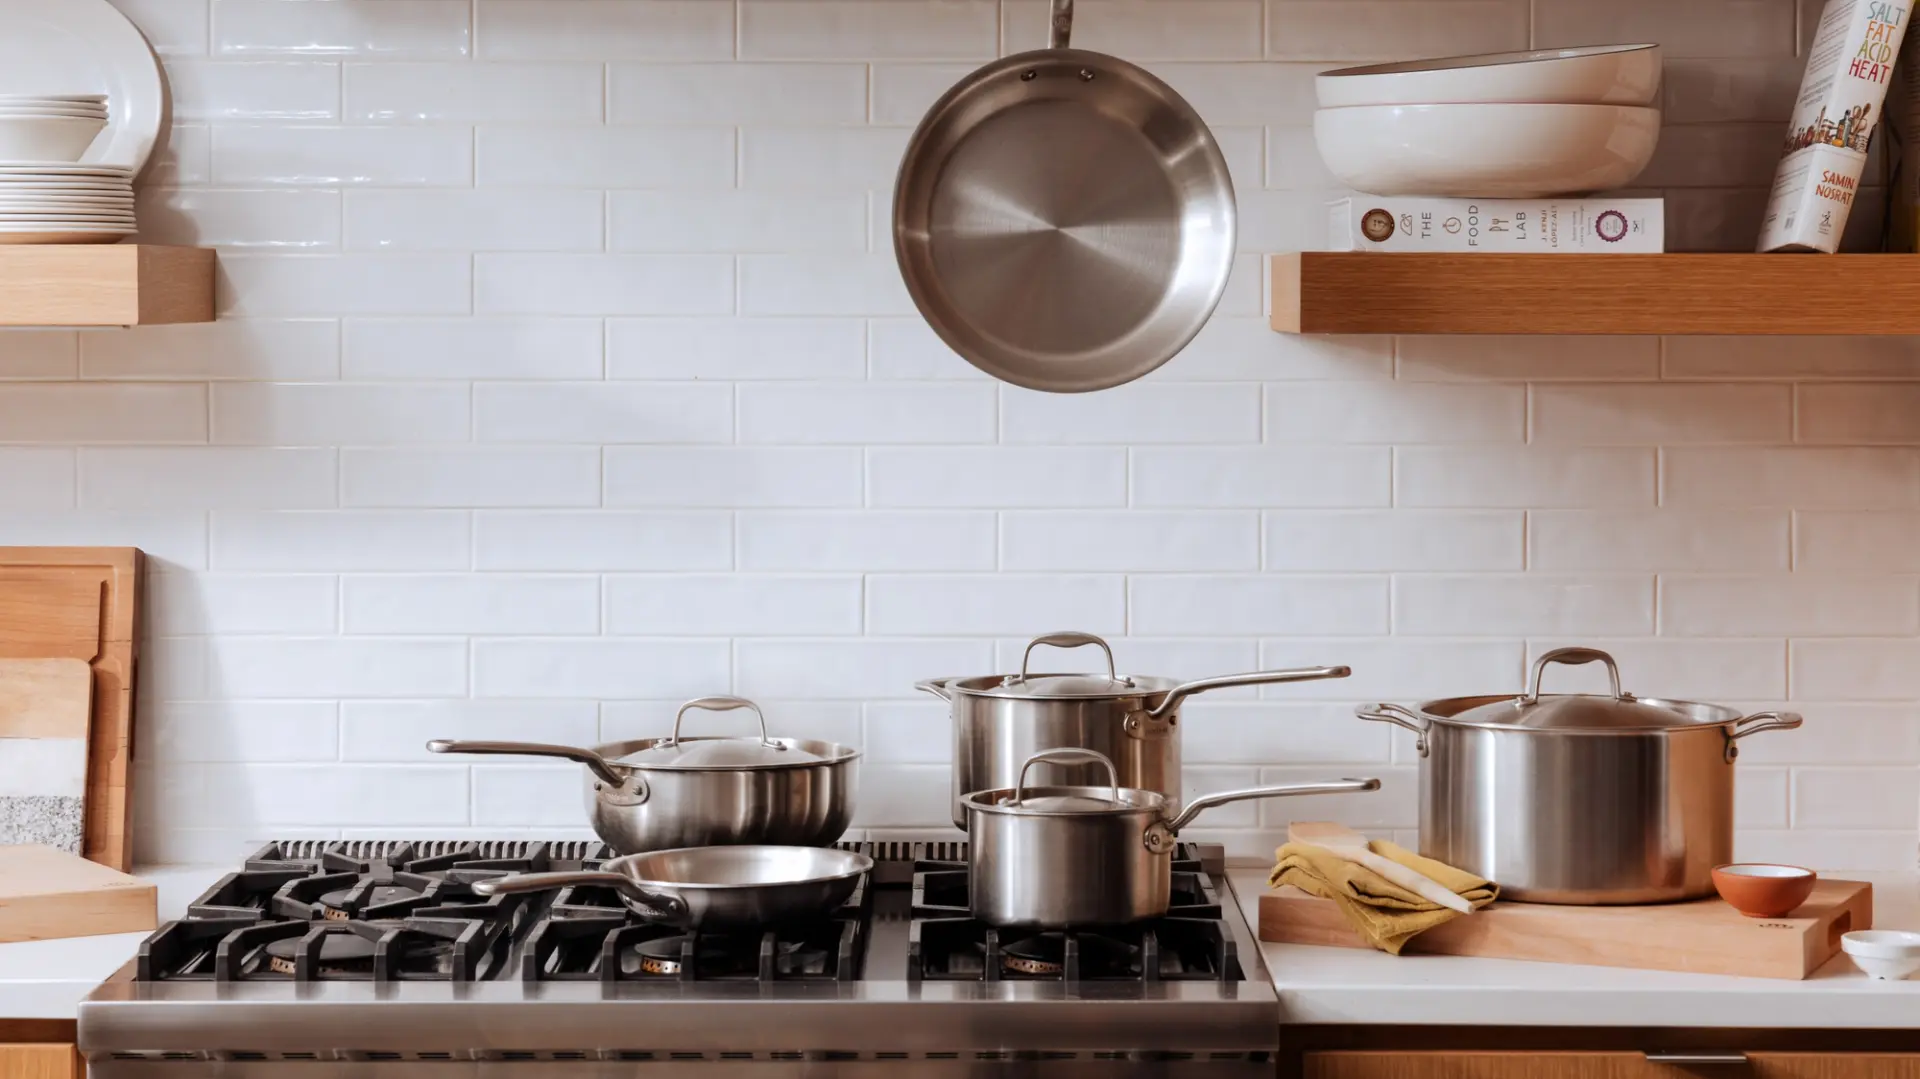 A well-organized kitchen counter with a variety of pots and a frying pan, a gas stove, and neatly arranged shelves against a tiled backsplash.